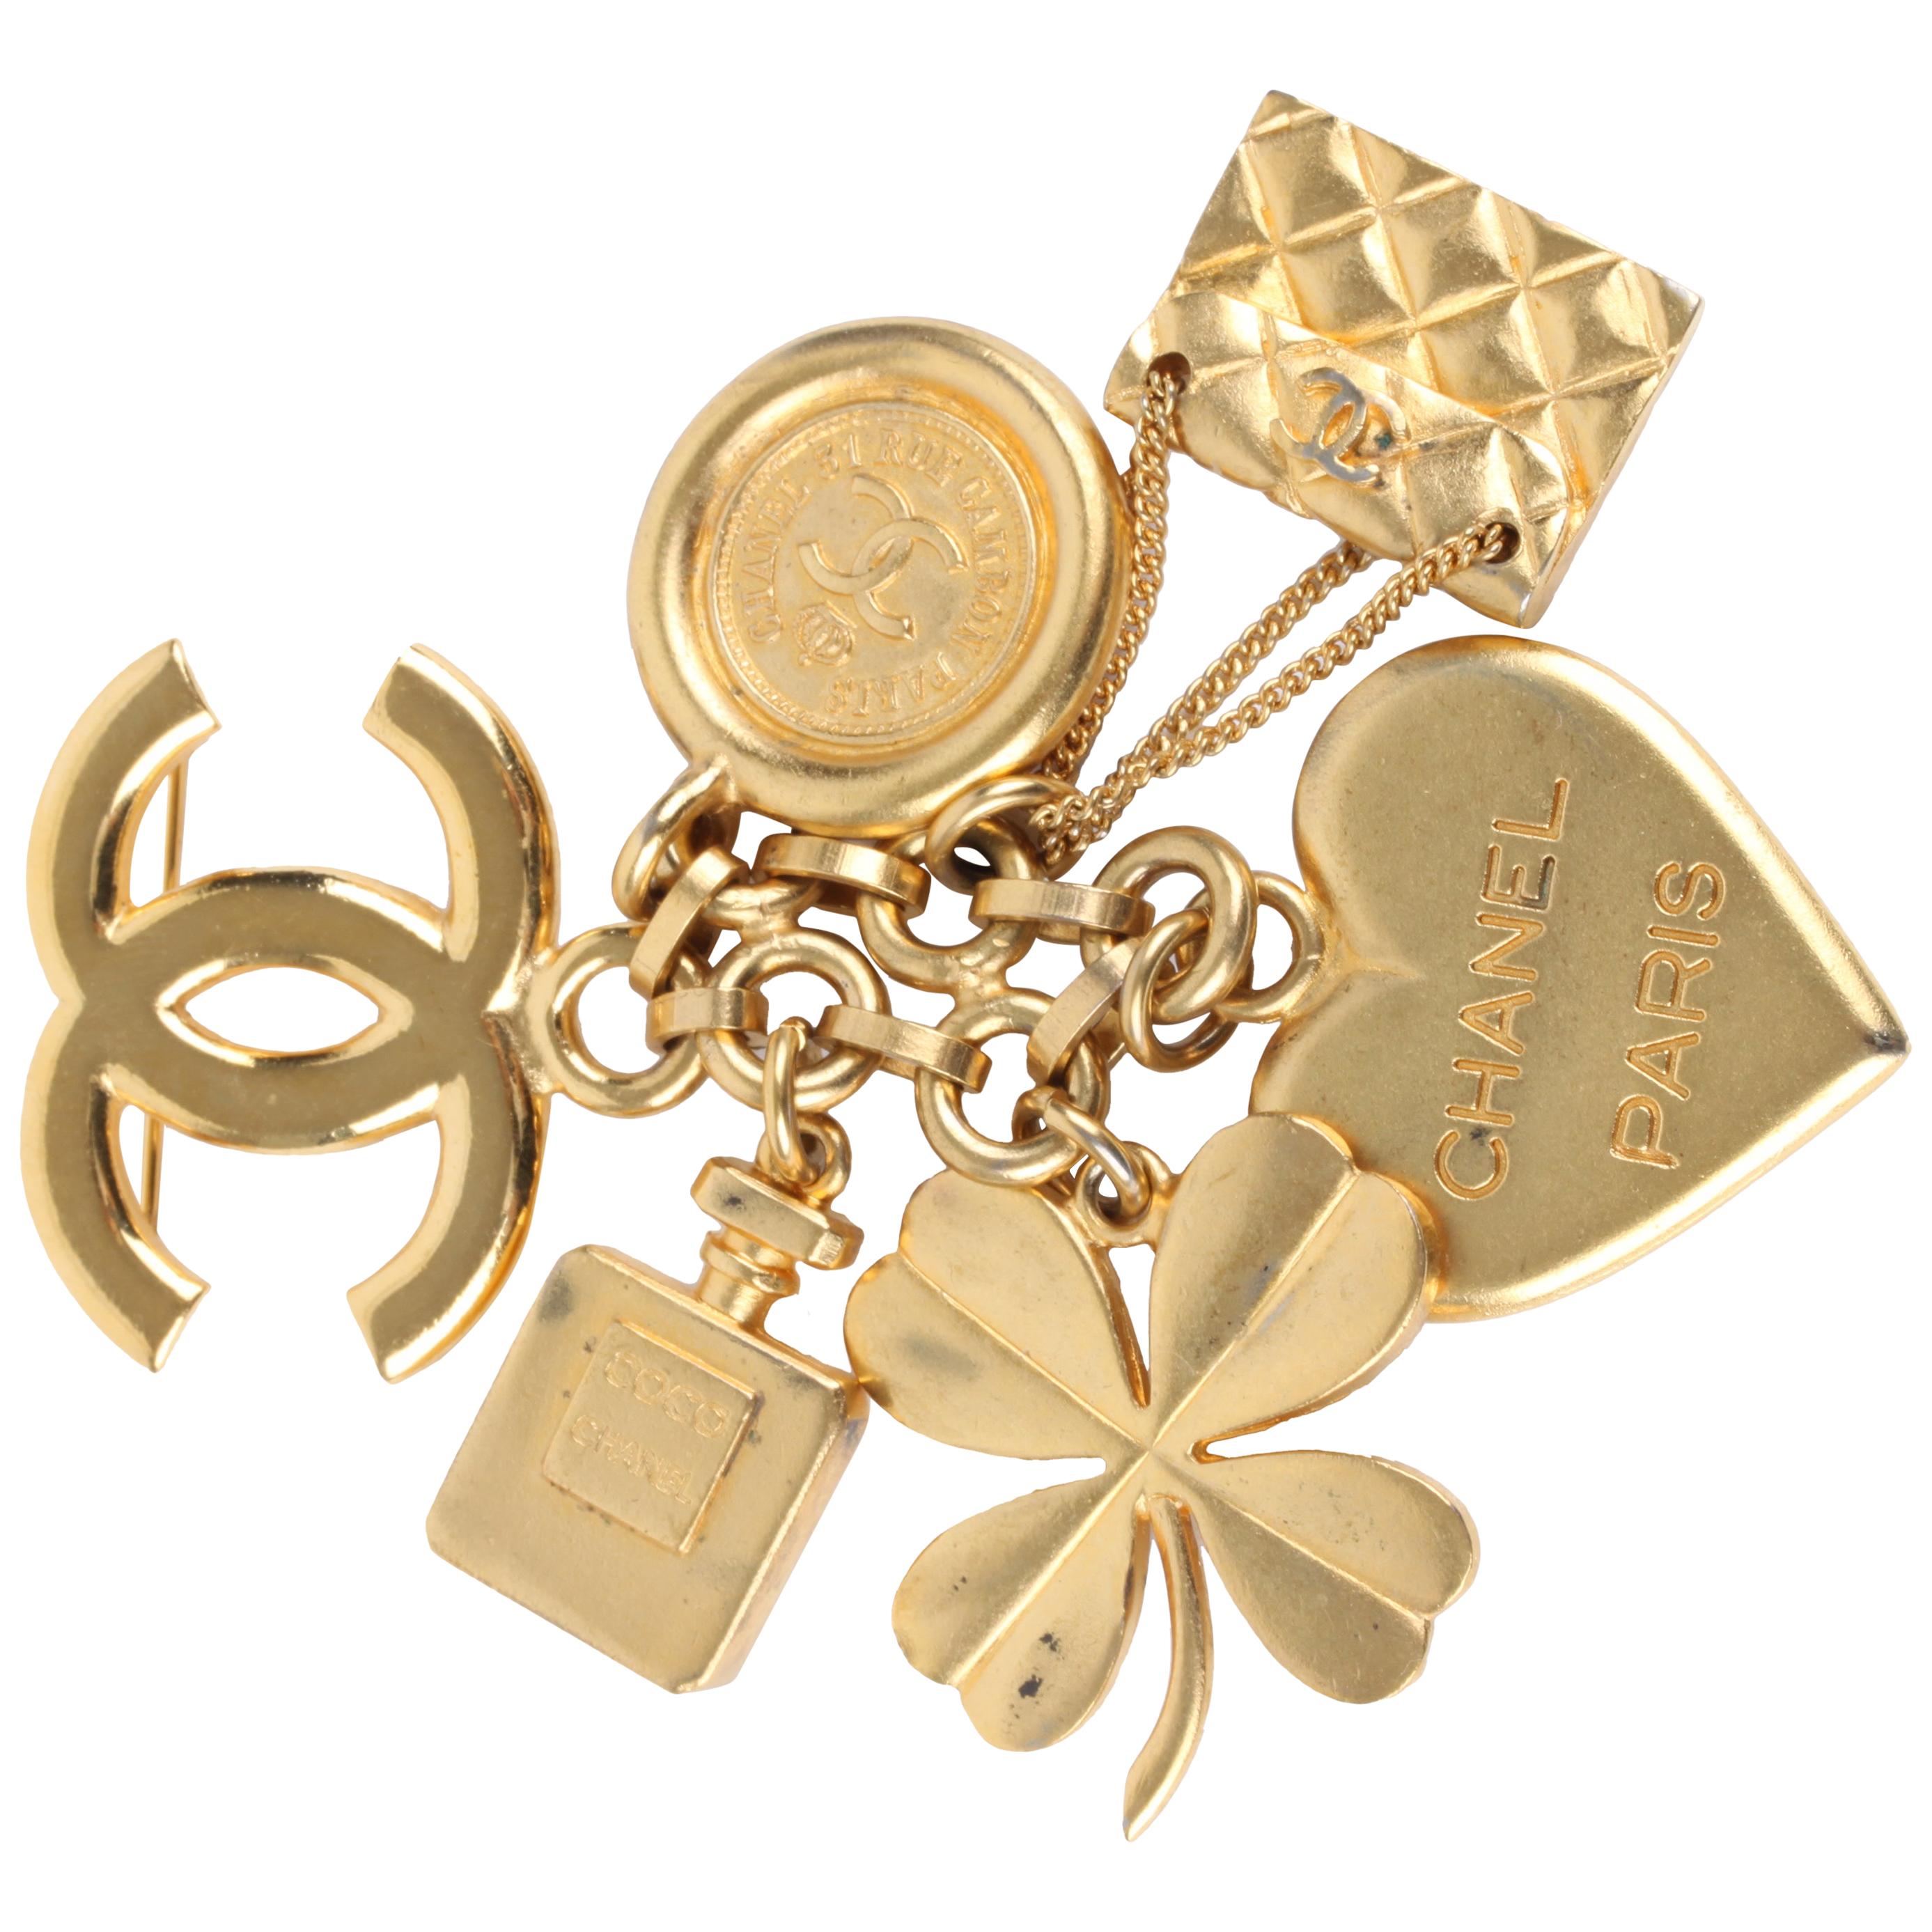   Chanel Iconic Lucky Charms Brooch - gold    For Sale